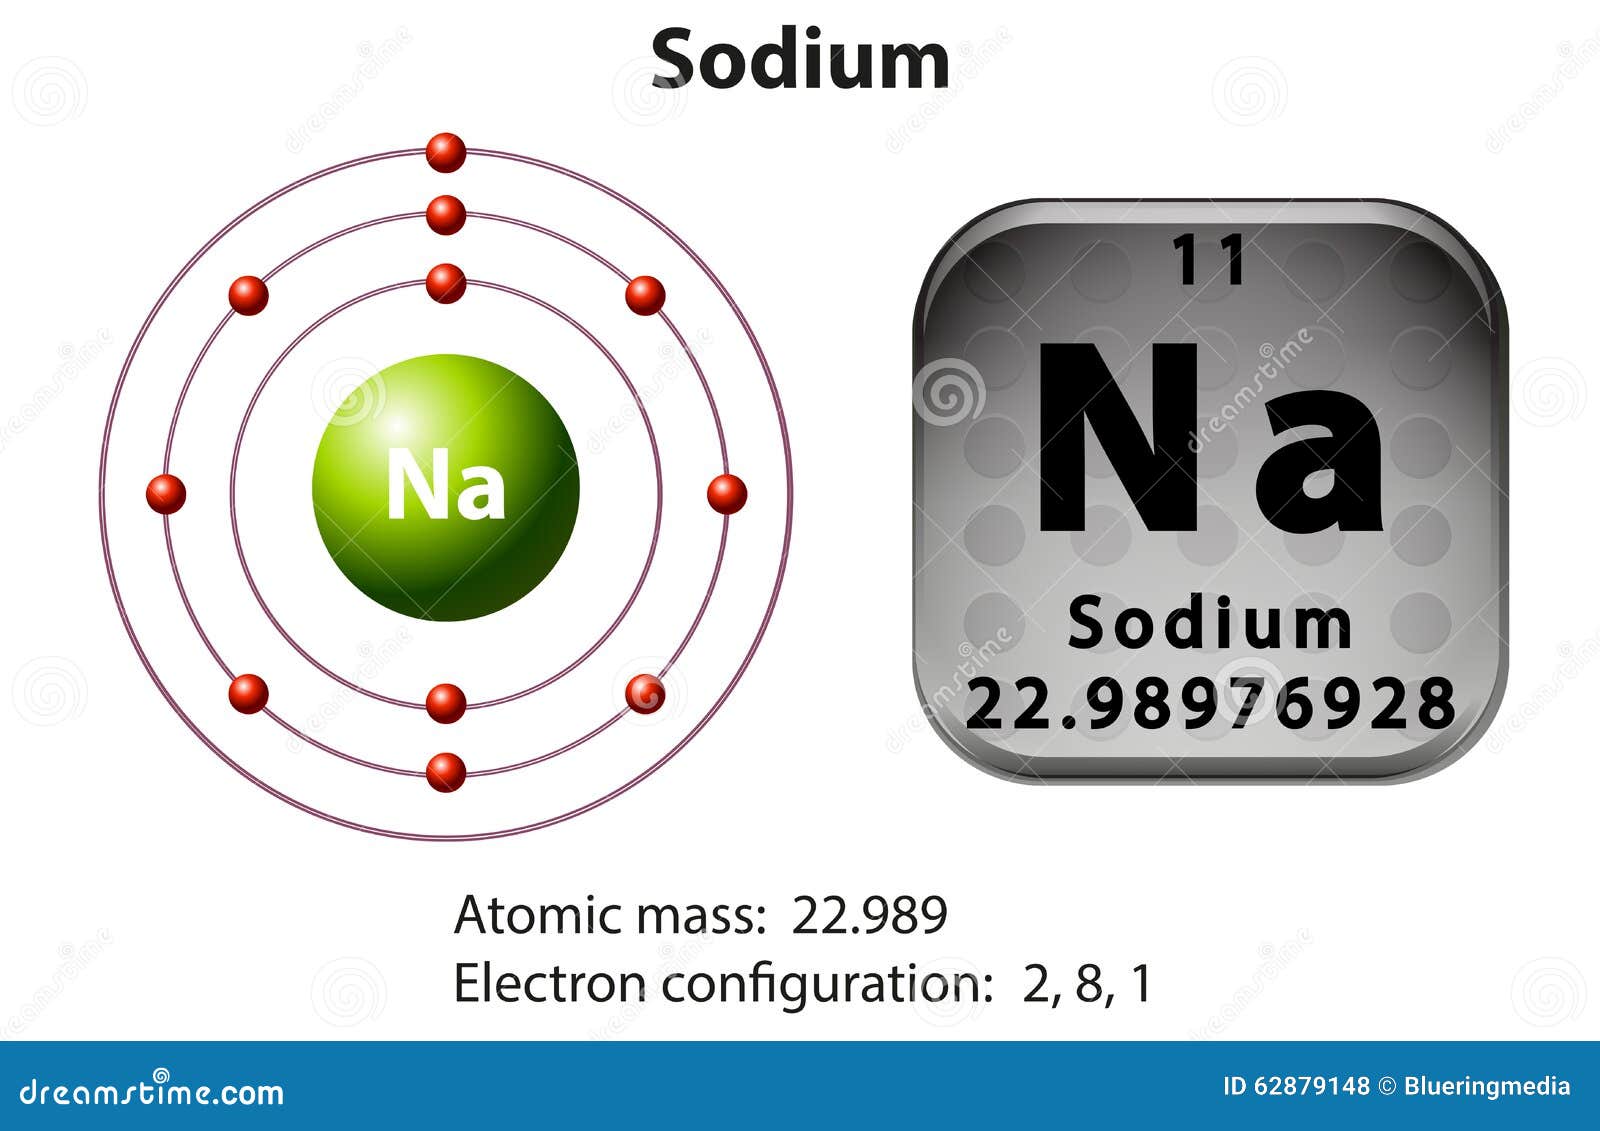 Symbol And Electron Diagram For Sodium Stock Vector ...
 Electron Dot Diagram For Sodium